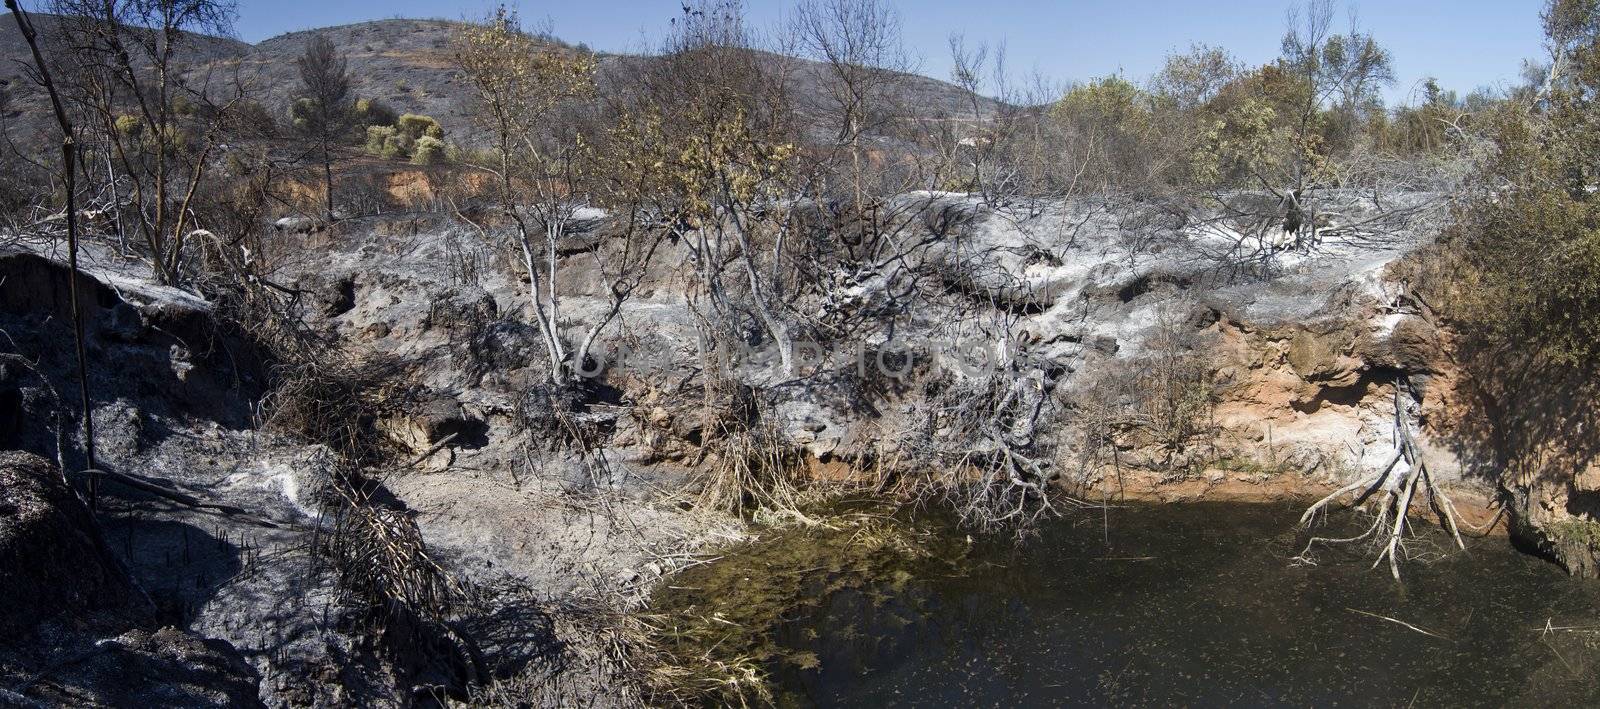 Landscape view of a burned forest, victim of a recent fire.